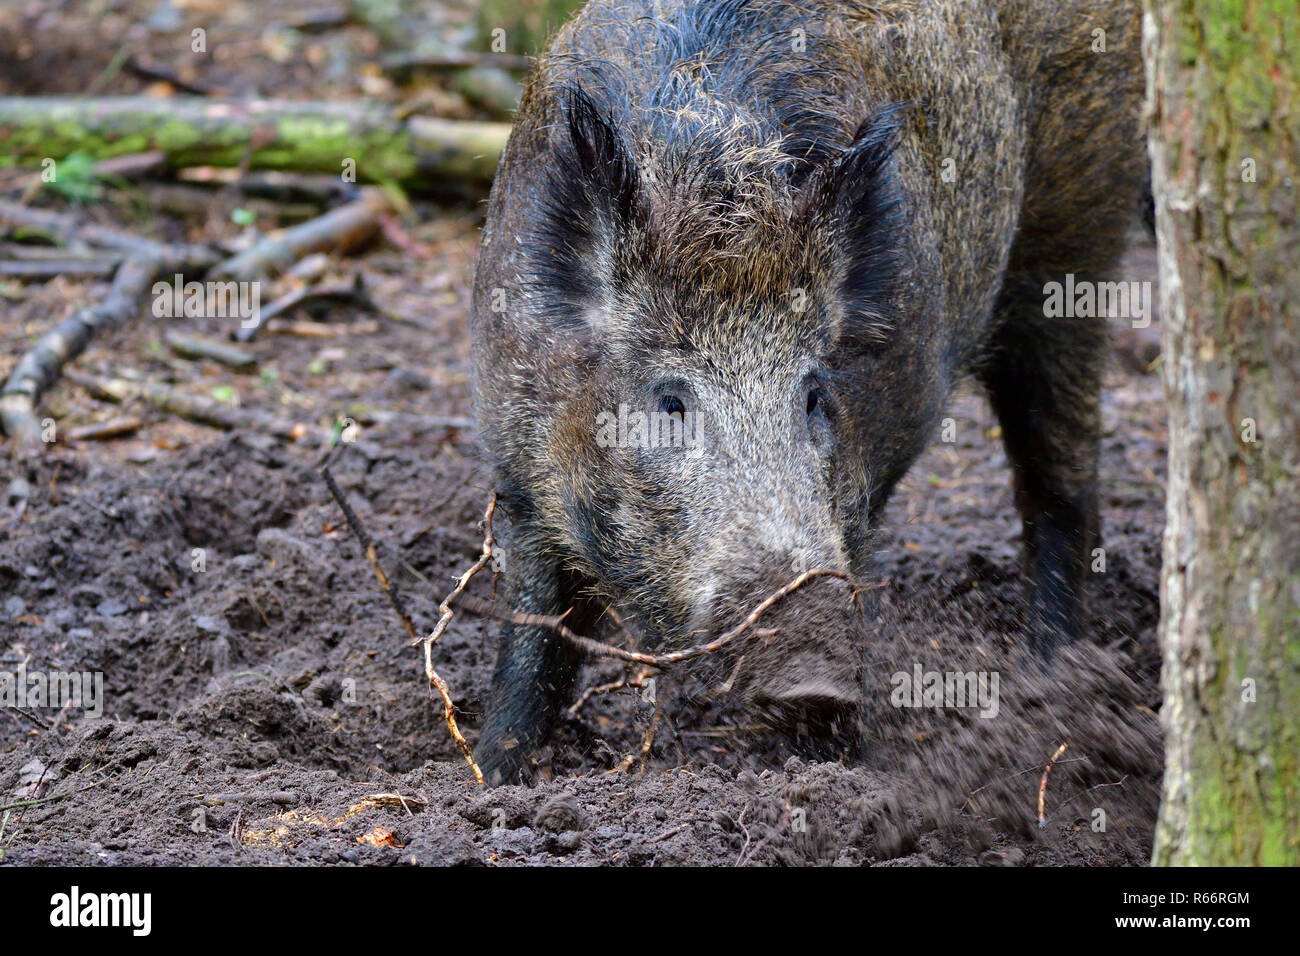 boar digs in the forest floor Stock Photo